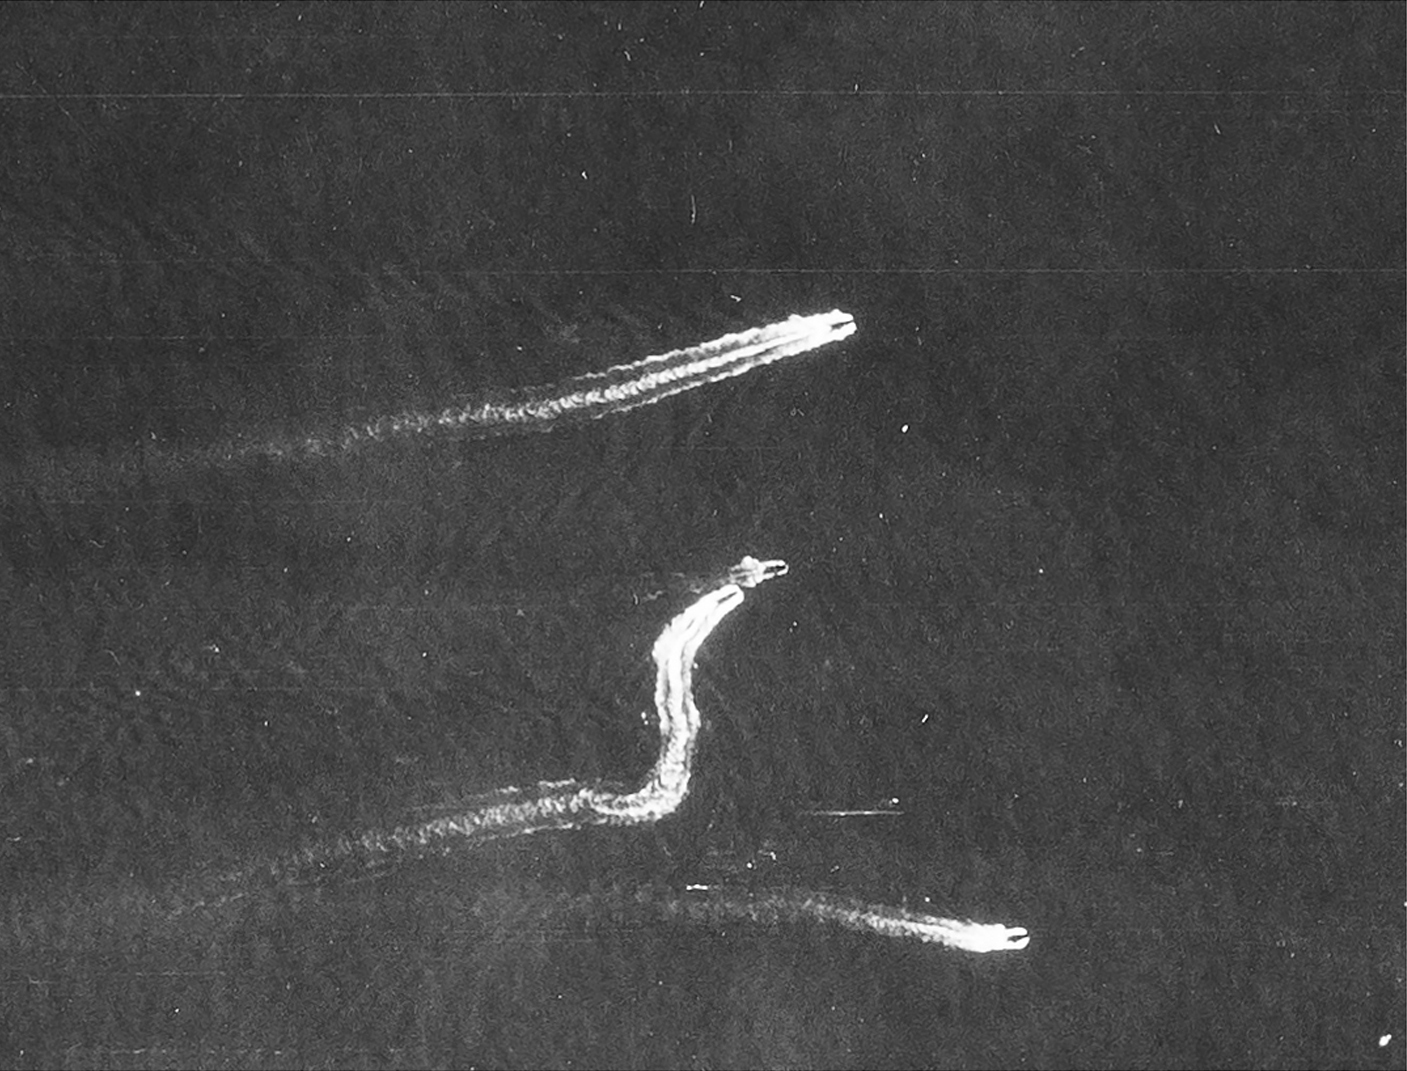 Detail from a black and white vertical aerial photograph, showing four landing craft at sea. Two vessels sail towards the right edge of the image. Between them, two others make an 'S'-shaped wake as they manoeuvre in the water.